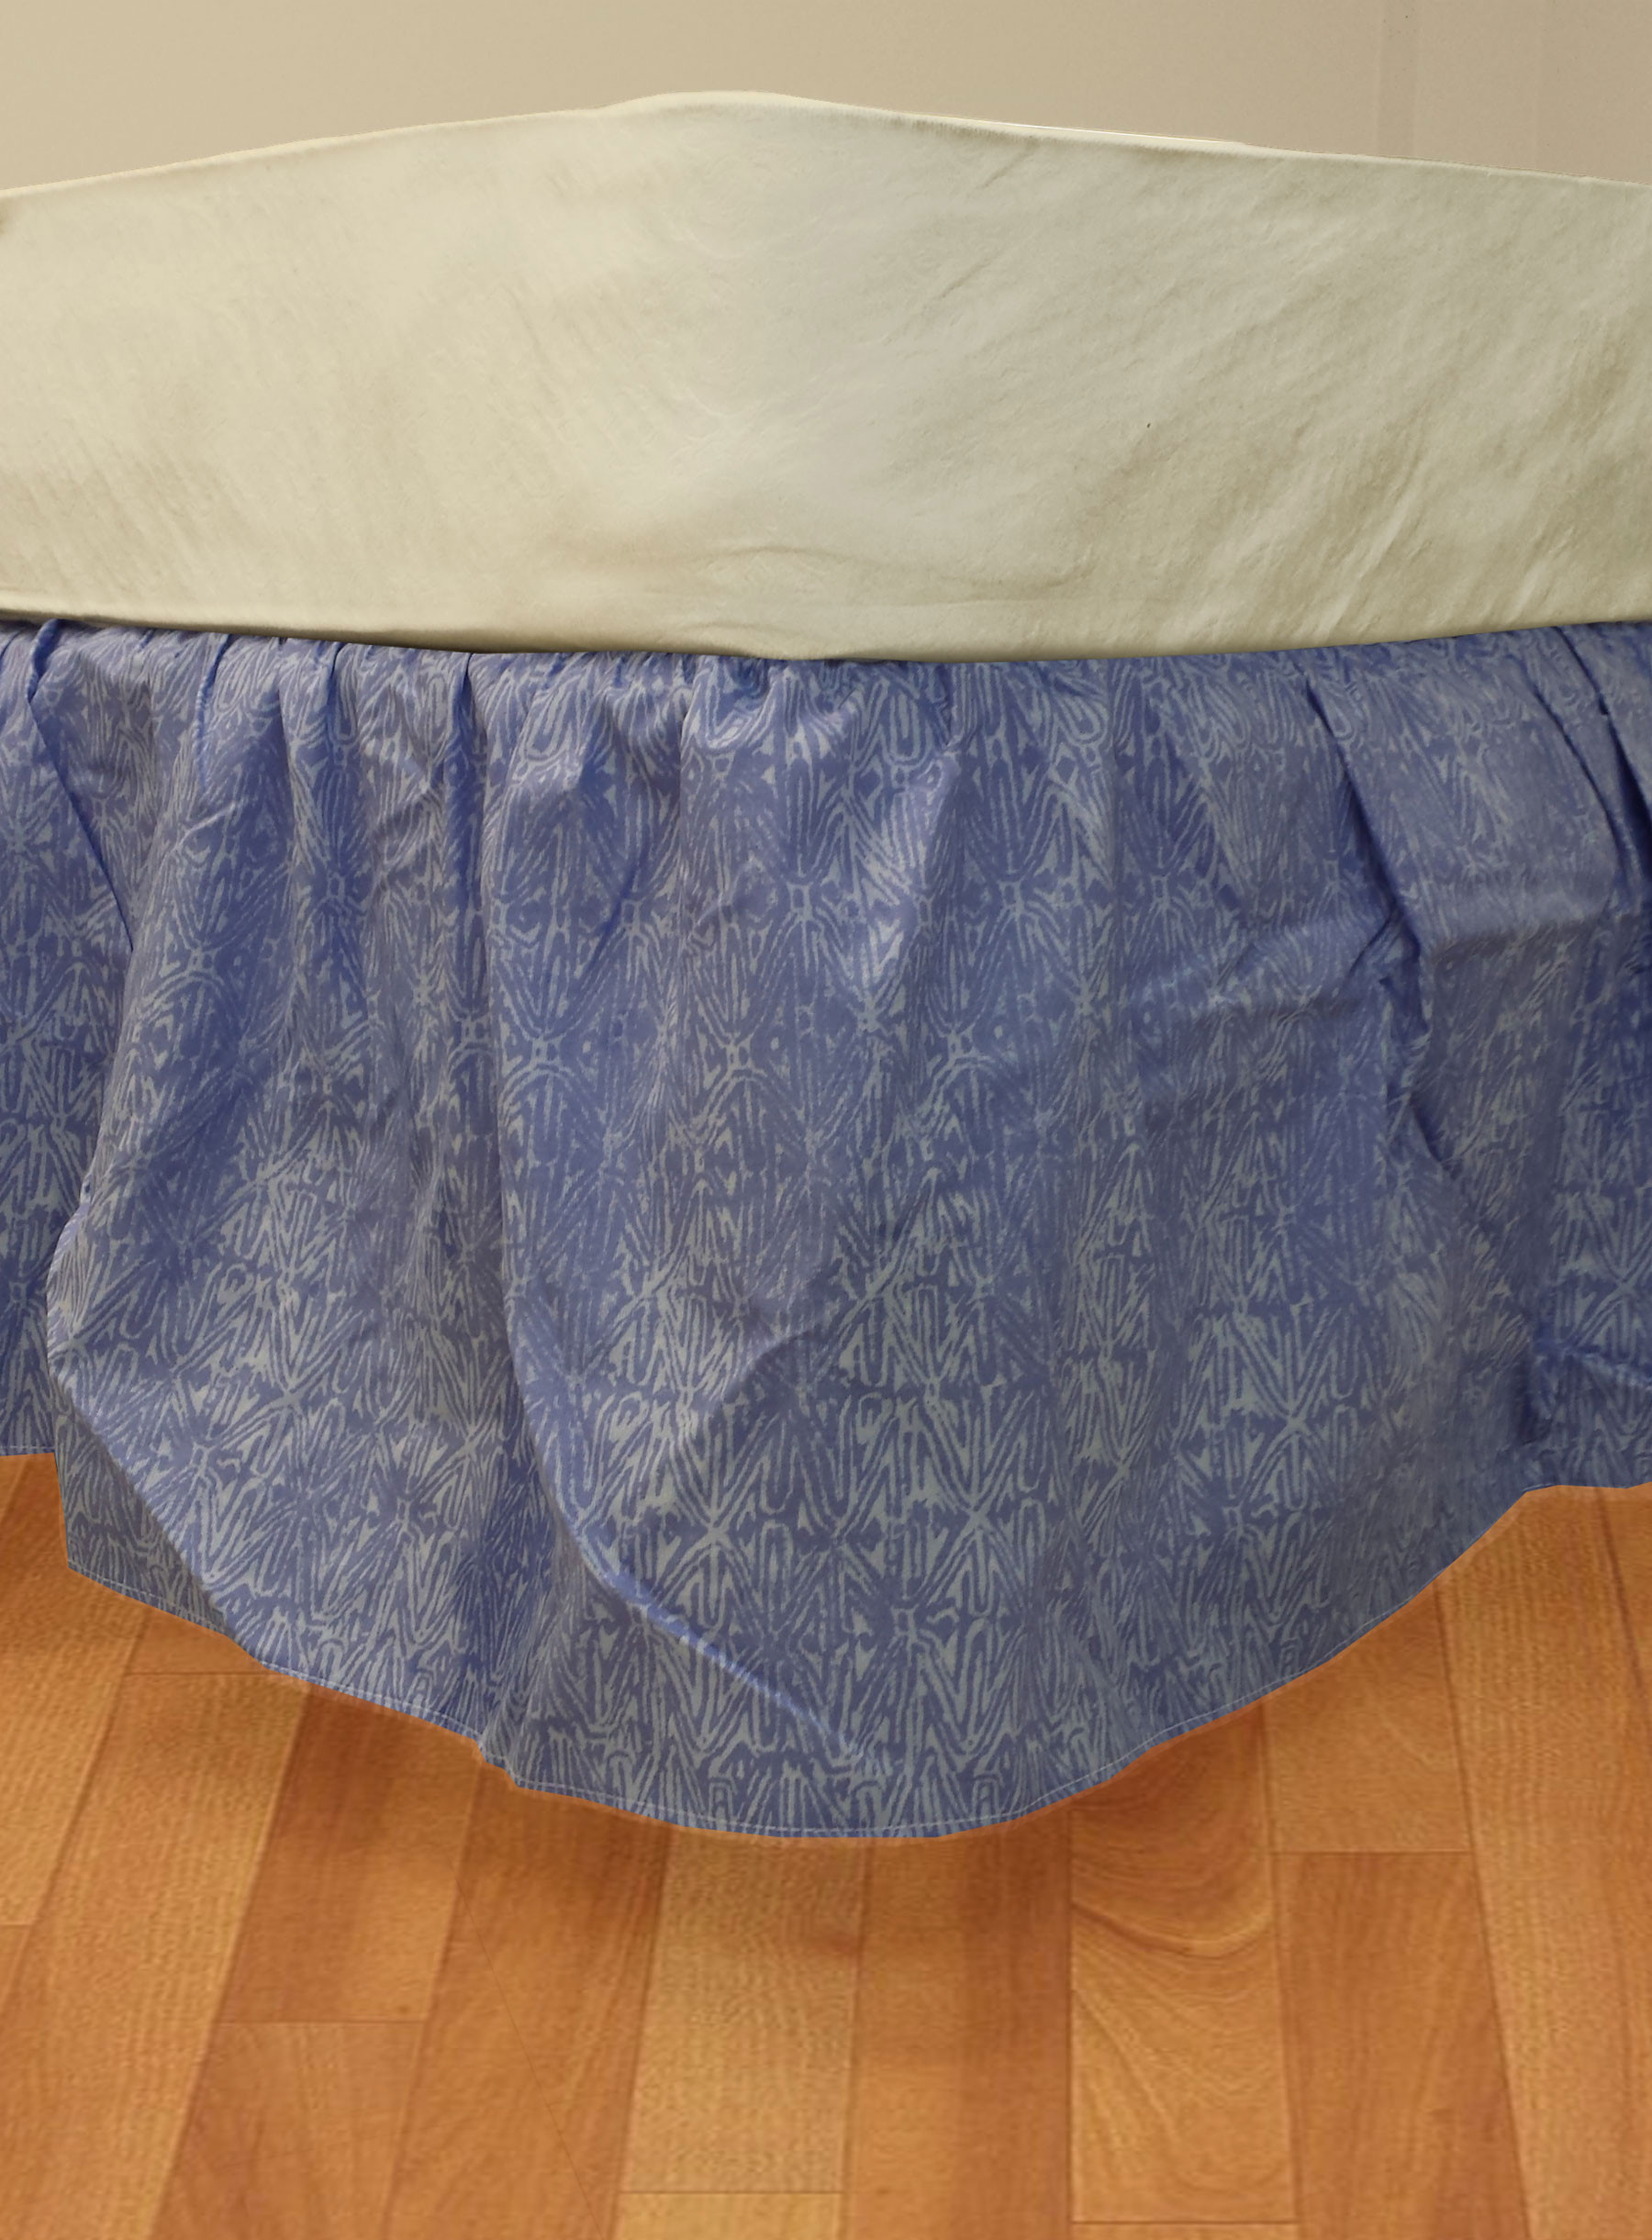 One Blue Geometric twin bed dust ruffle, 39 x 75 inches with approximately a 13 inch drop. #bed